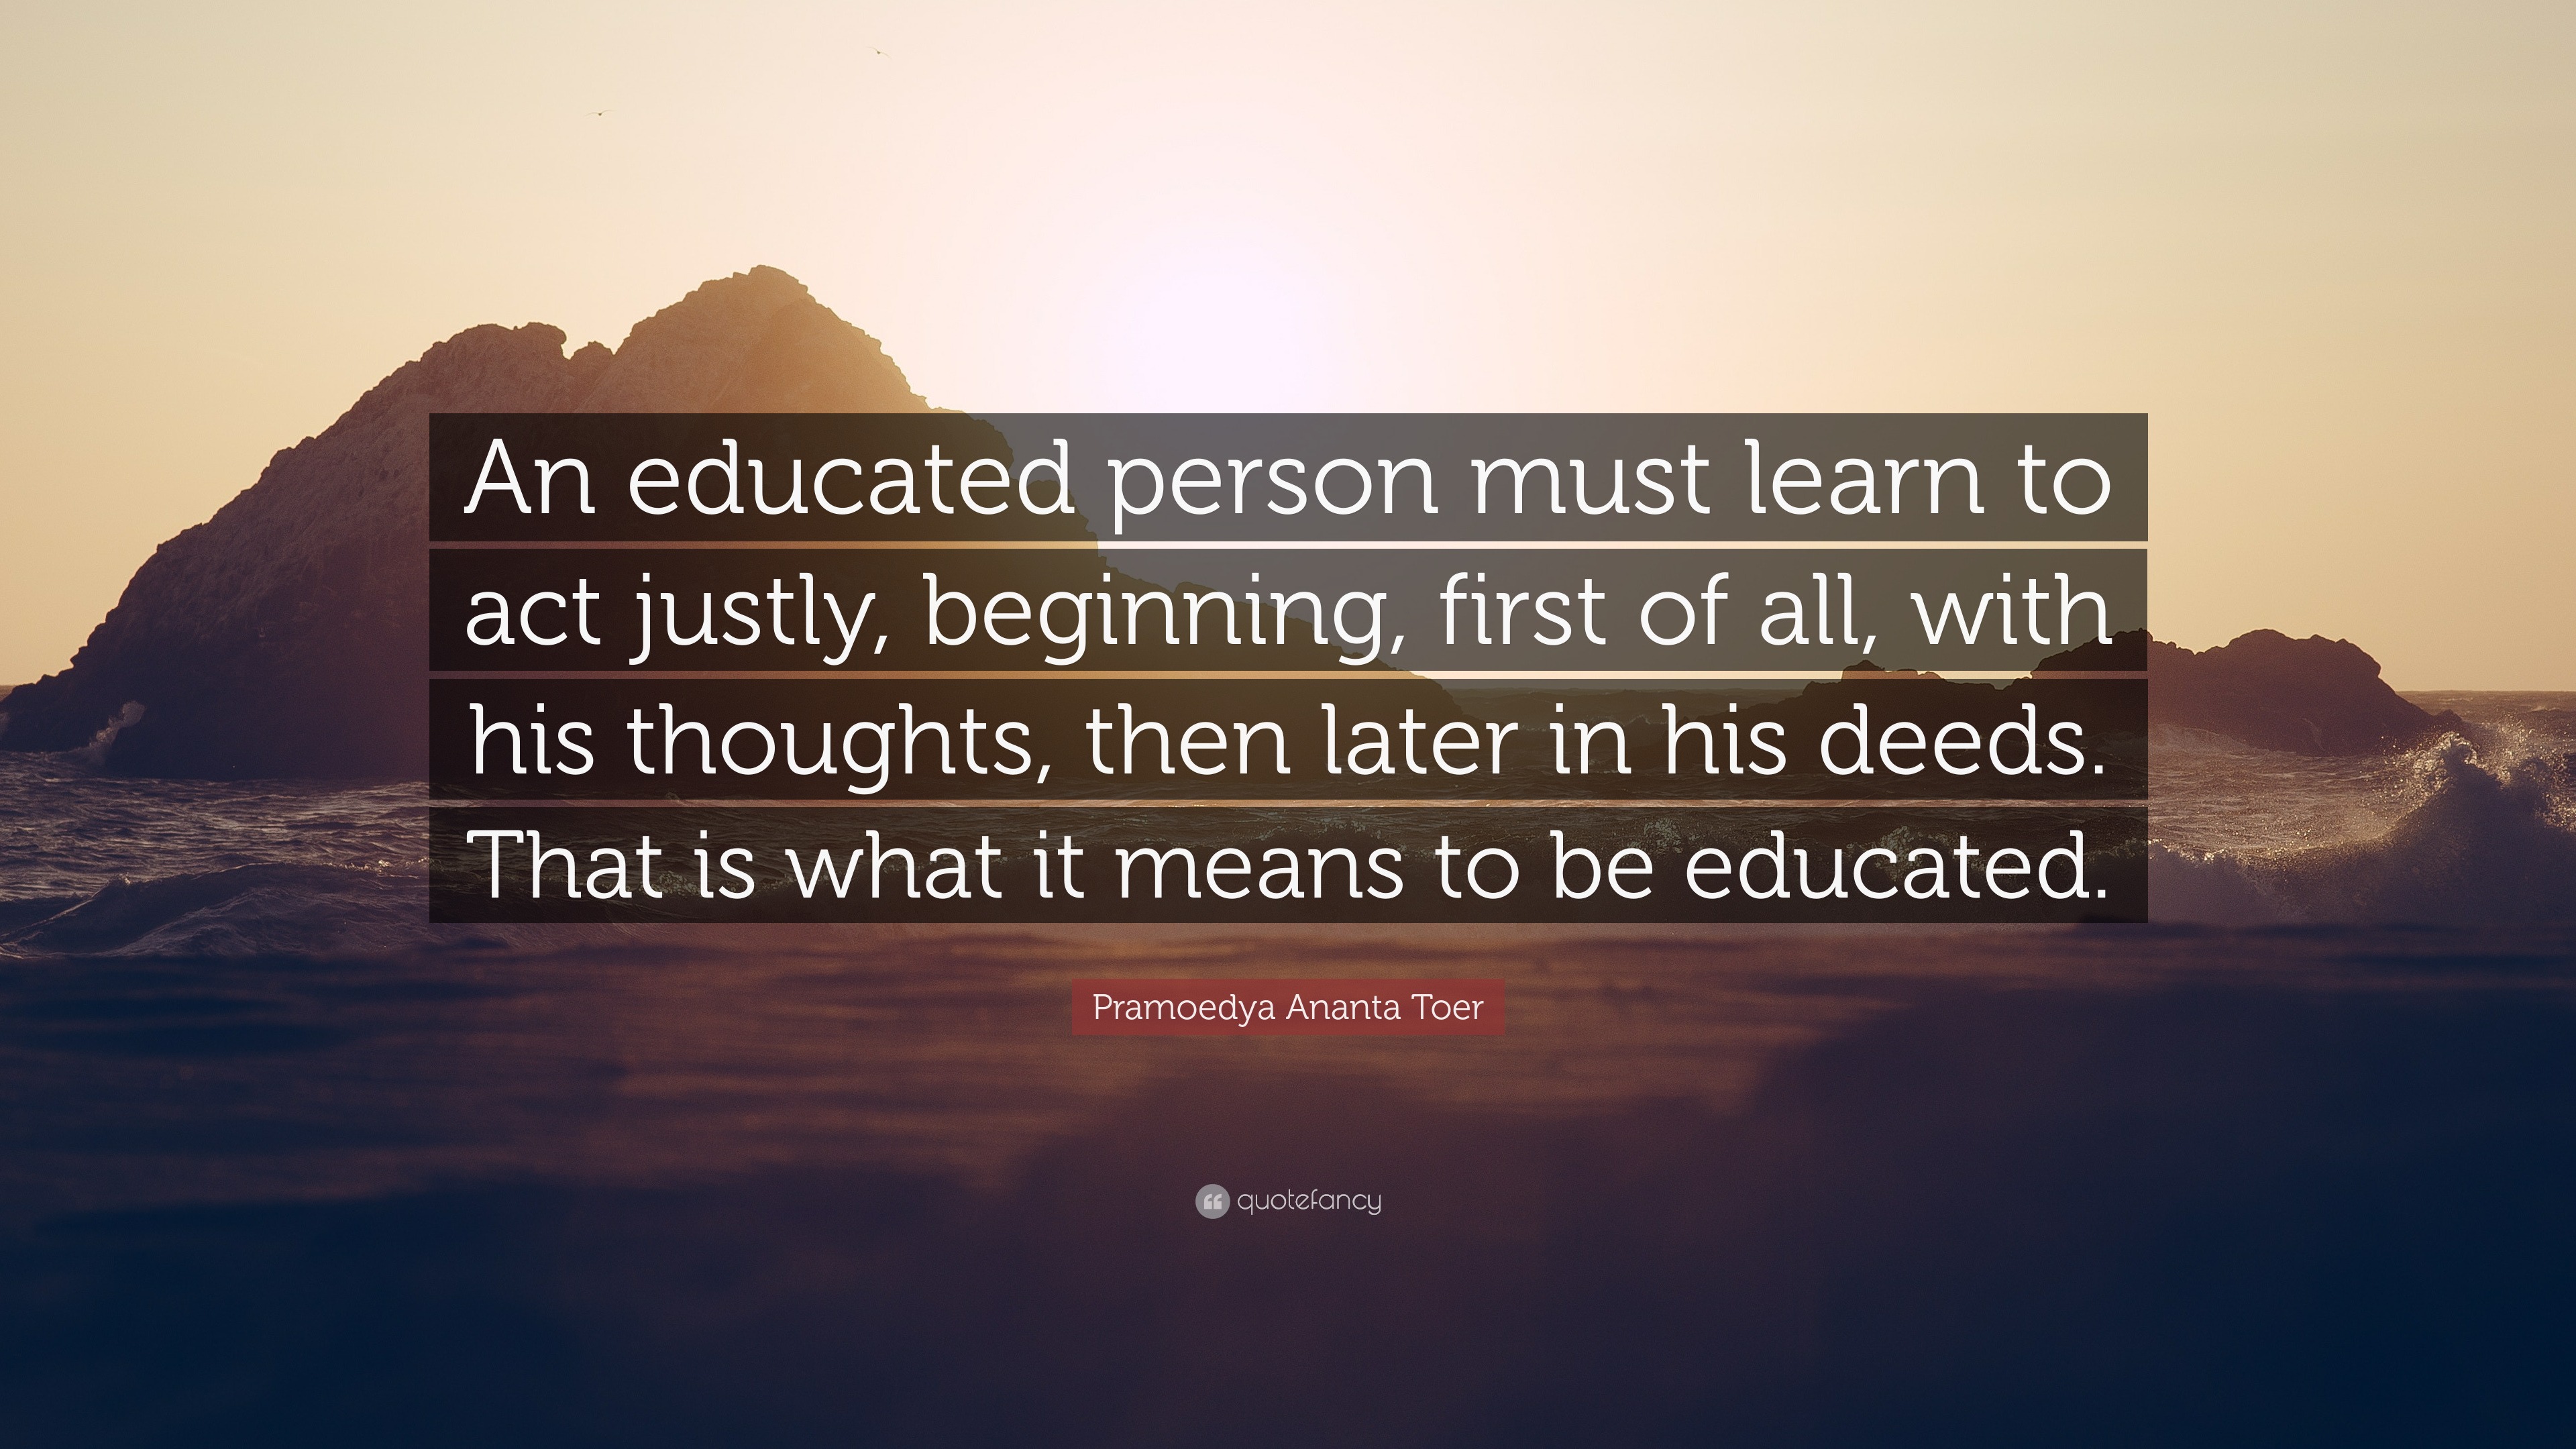 Pramoedya Ananta Toer Quote: “An educated person must learn to act ...